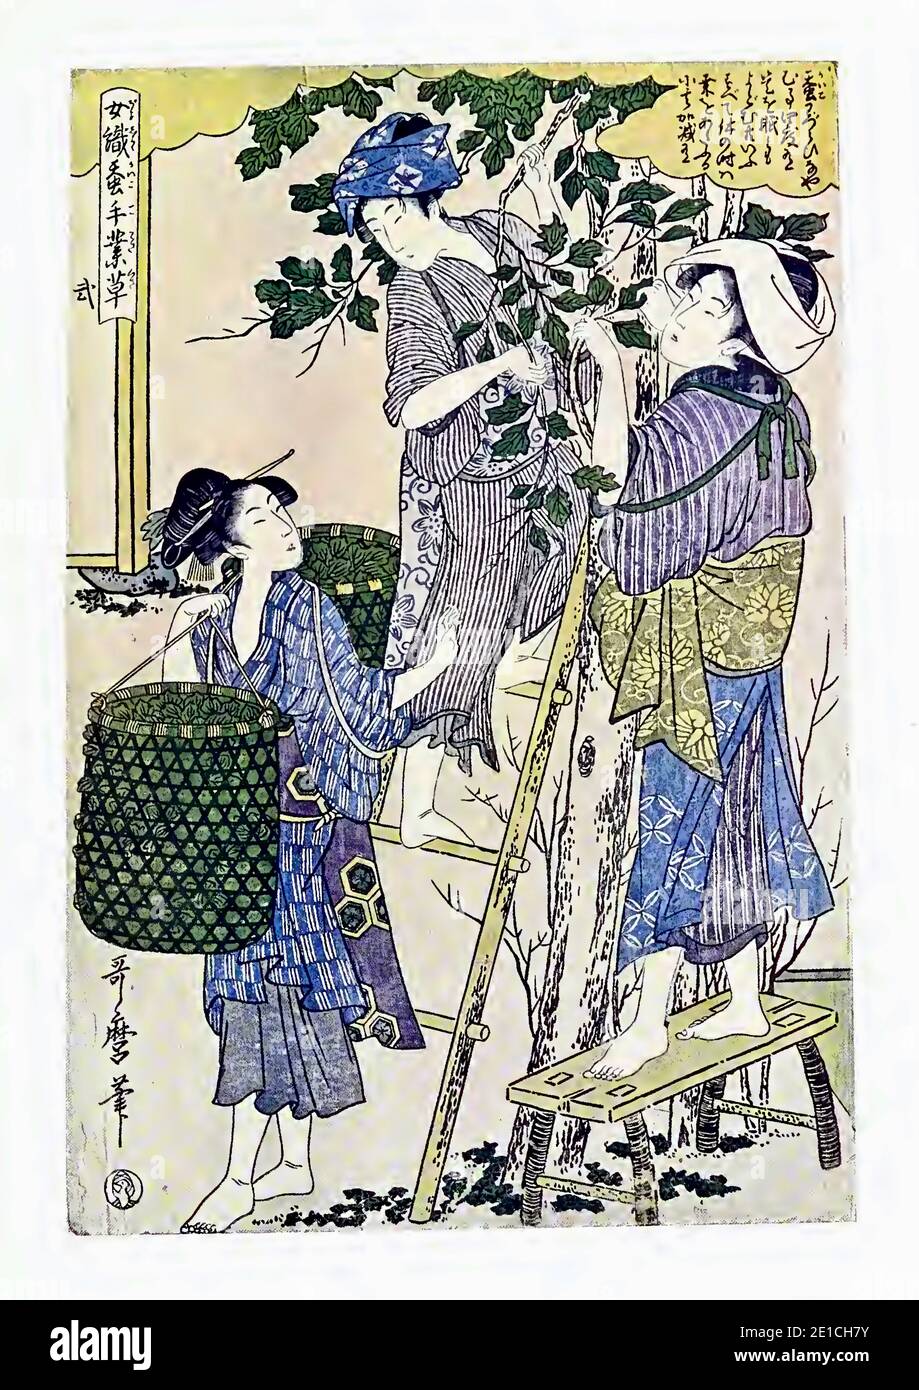 Kitagawa Utamaro vintage print from the 1700's entitled Women Engaged in the Sericulture Industry, No.2 or Girls Gathering Mulberry Leaves. Stock Photo